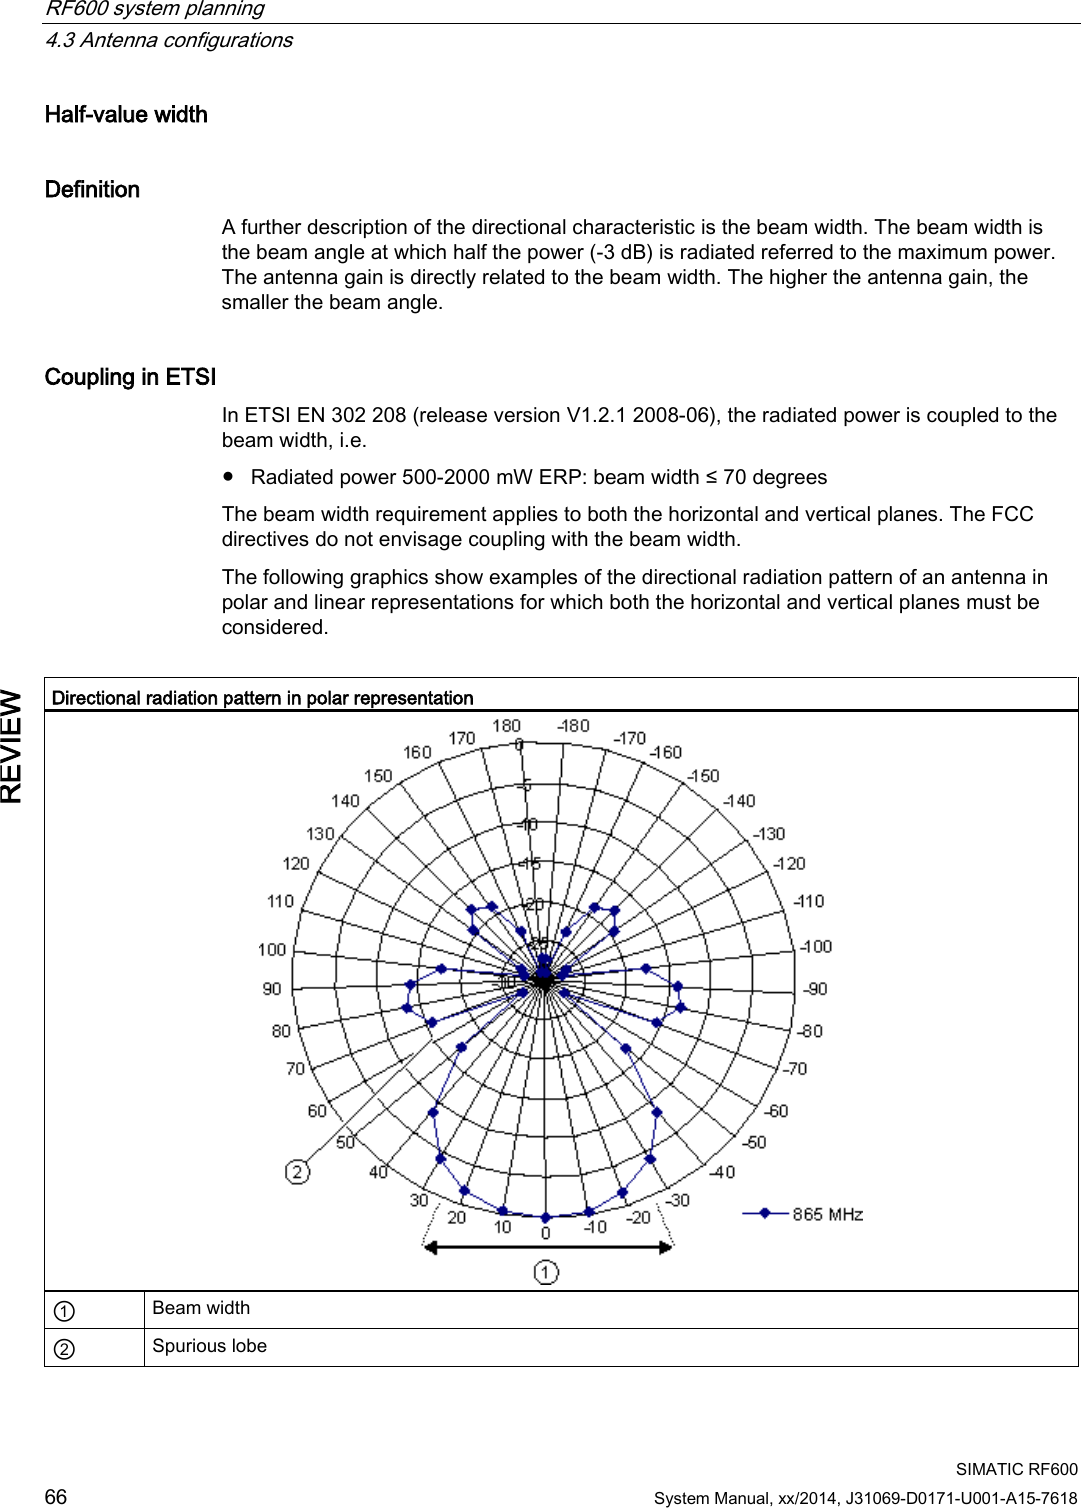 RF600 system planning   4.3 Antenna configurations  SIMATIC RF600 66 System Manual, xx/2014, J31069-D0171-U001-A15-7618 REVIEW Half-value width Definition A further description of the directional characteristic is the beam width. The beam width is the beam angle at which half the power (-3 dB) is radiated referred to the maximum power. The antenna gain is directly related to the beam width. The higher the antenna gain, the smaller the beam angle.  Coupling in ETSI In ETSI EN 302 208 (release version V1.2.1 2008-06), the radiated power is coupled to the beam width, i.e. ● Radiated power 500-2000 mW ERP: beam width ≤ 70 degrees The beam width requirement applies to both the horizontal and vertical planes. The FCC directives do not envisage coupling with the beam width. The following graphics show examples of the directional radiation pattern of an antenna in polar and linear representations for which both the horizontal and vertical planes must be considered.  Directional radiation pattern in polar representation  ① Beam width ② Spurious lobe  